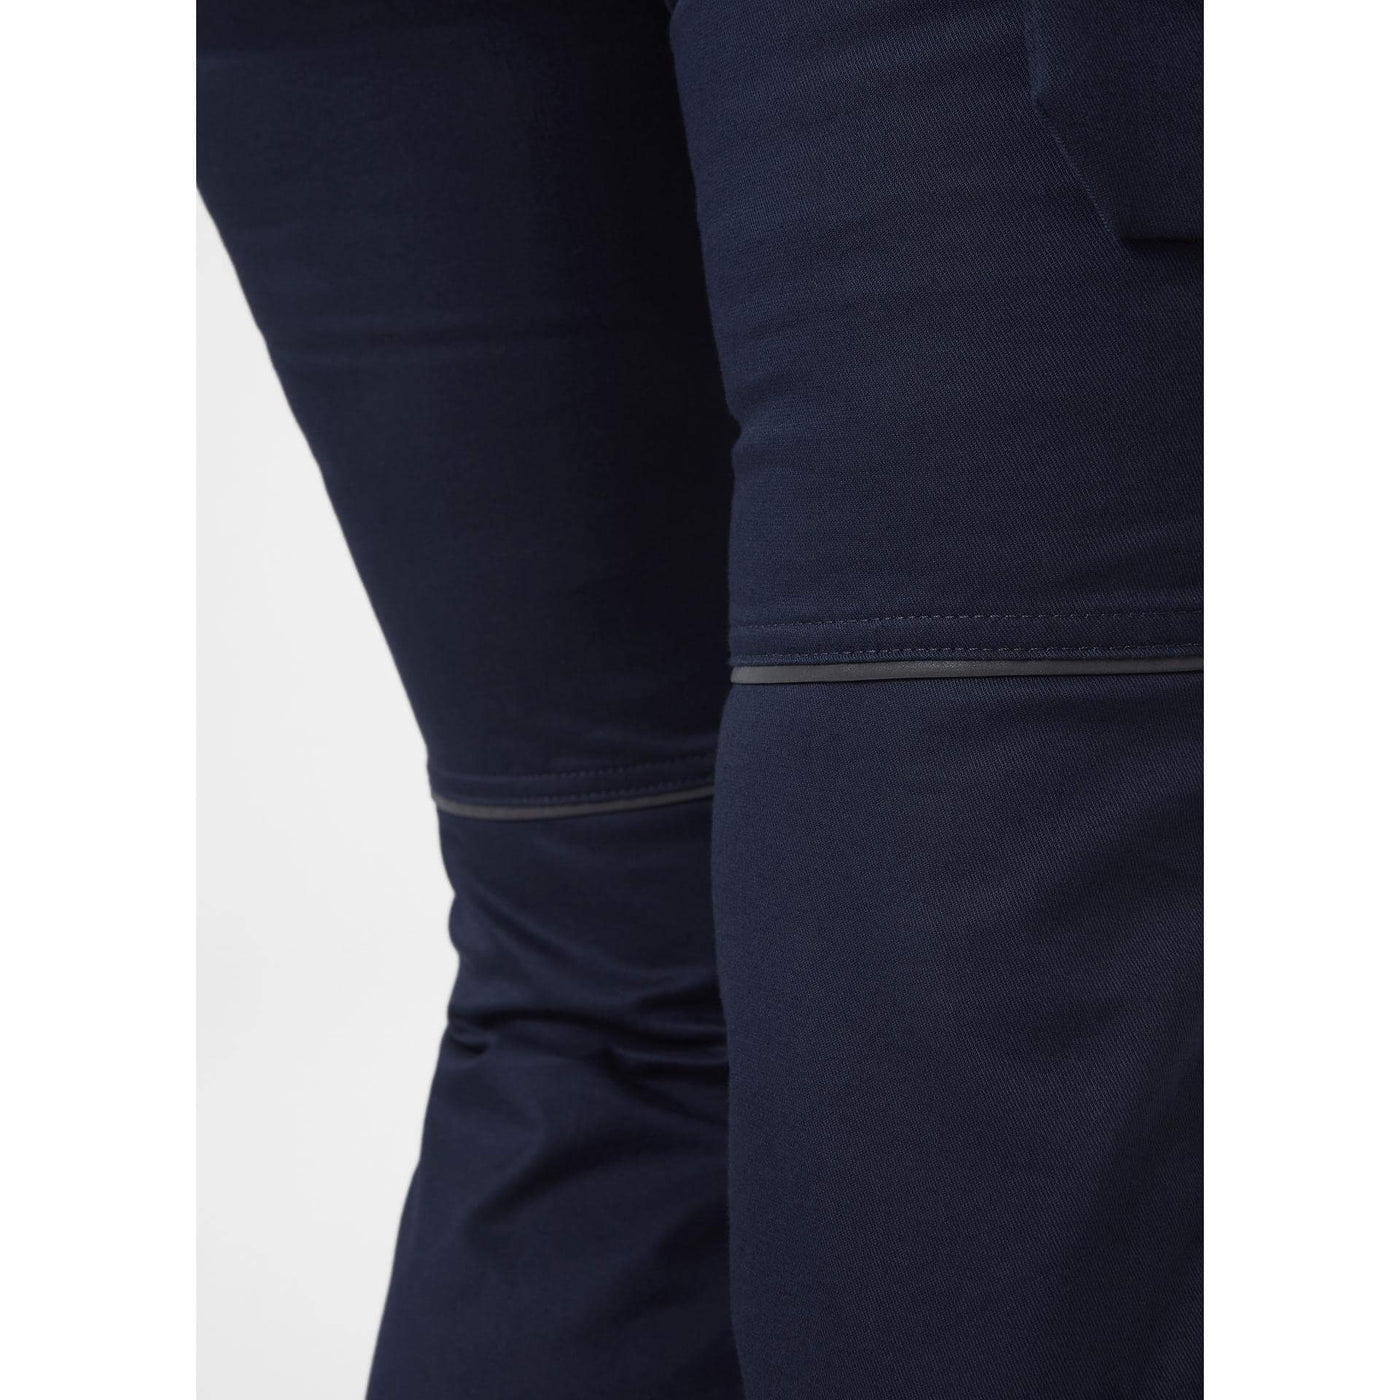 Helly Hansen Womens Luna Light Stretch Service Trousers Navy 6 Feature 2#colour_navy